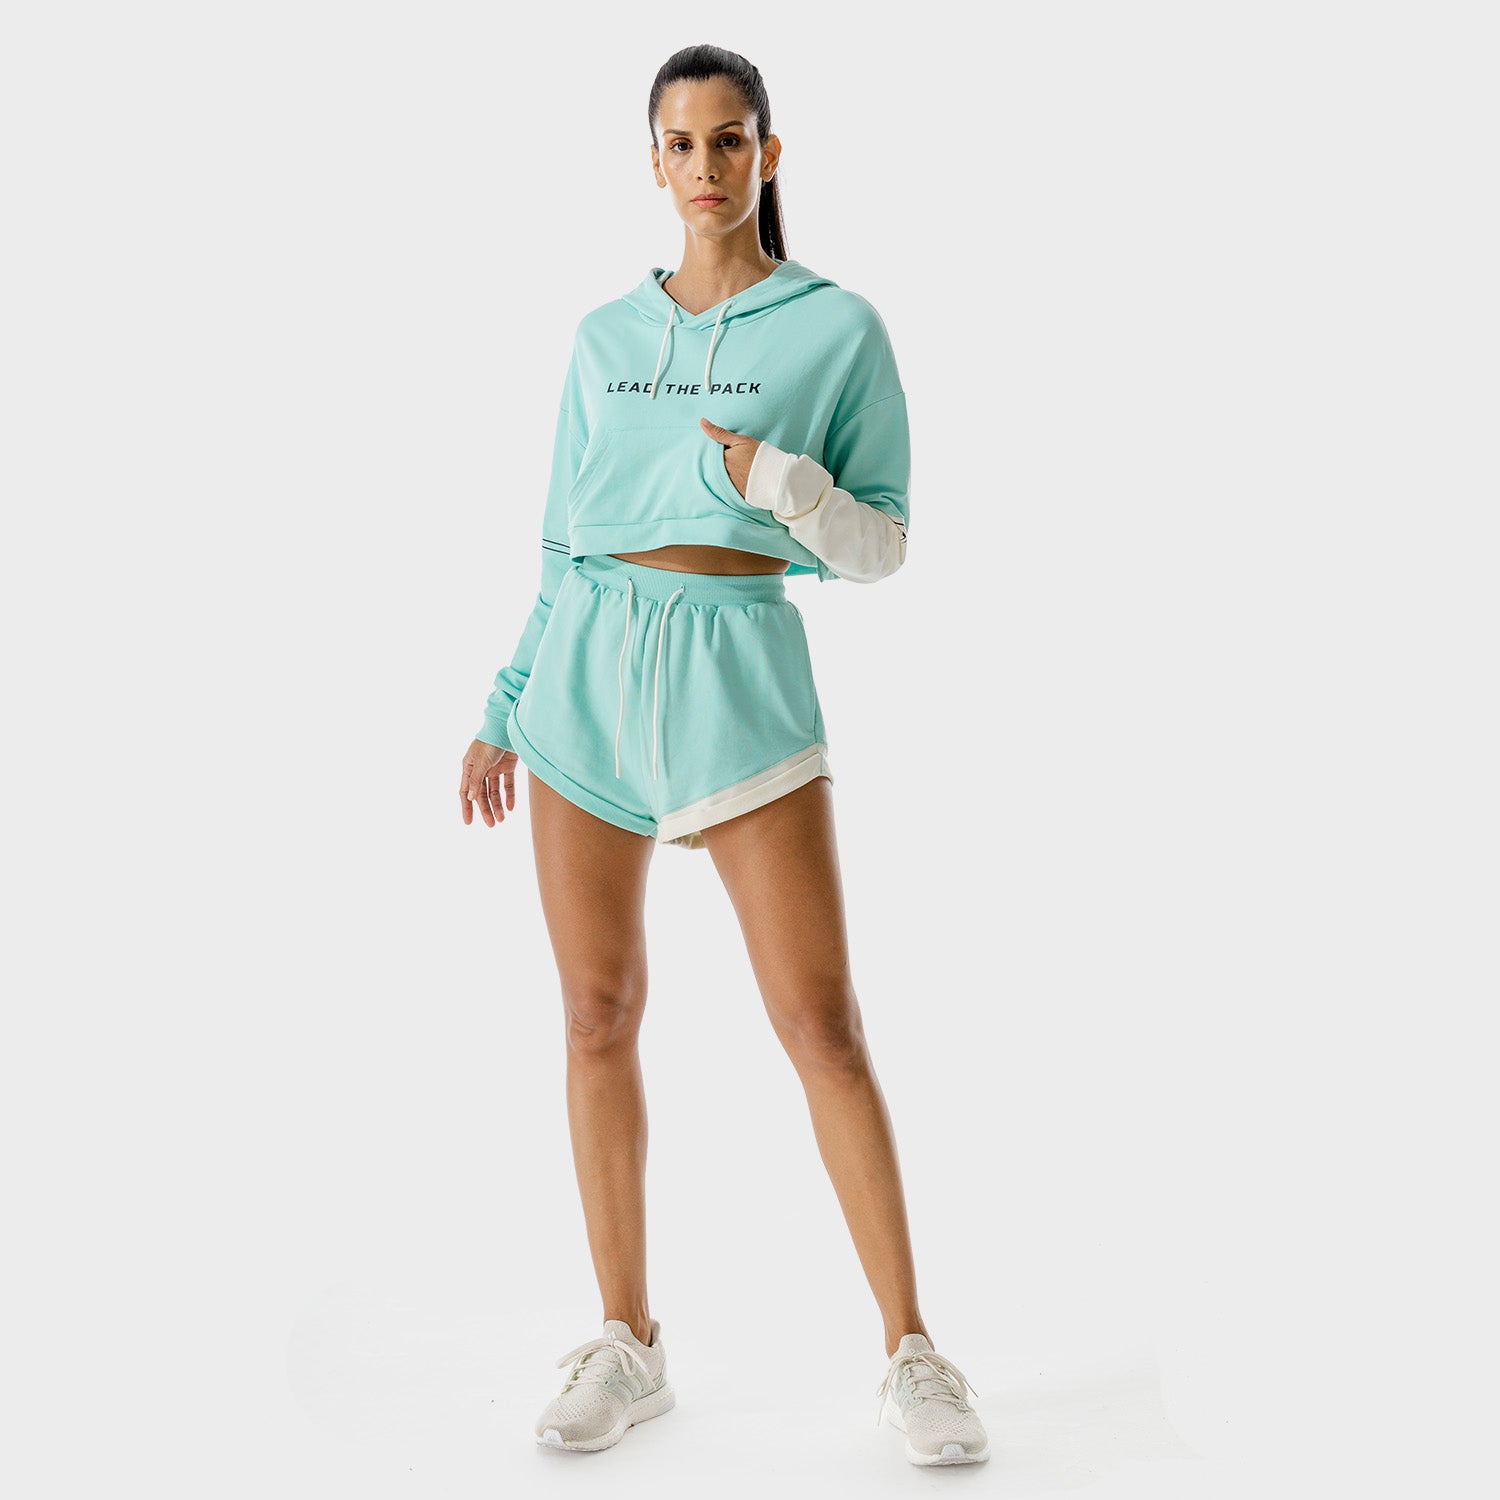 squatwolf-gym-hoodies-women-lab-360-crop-hoodie-pastel-turquoise-workout-clothes